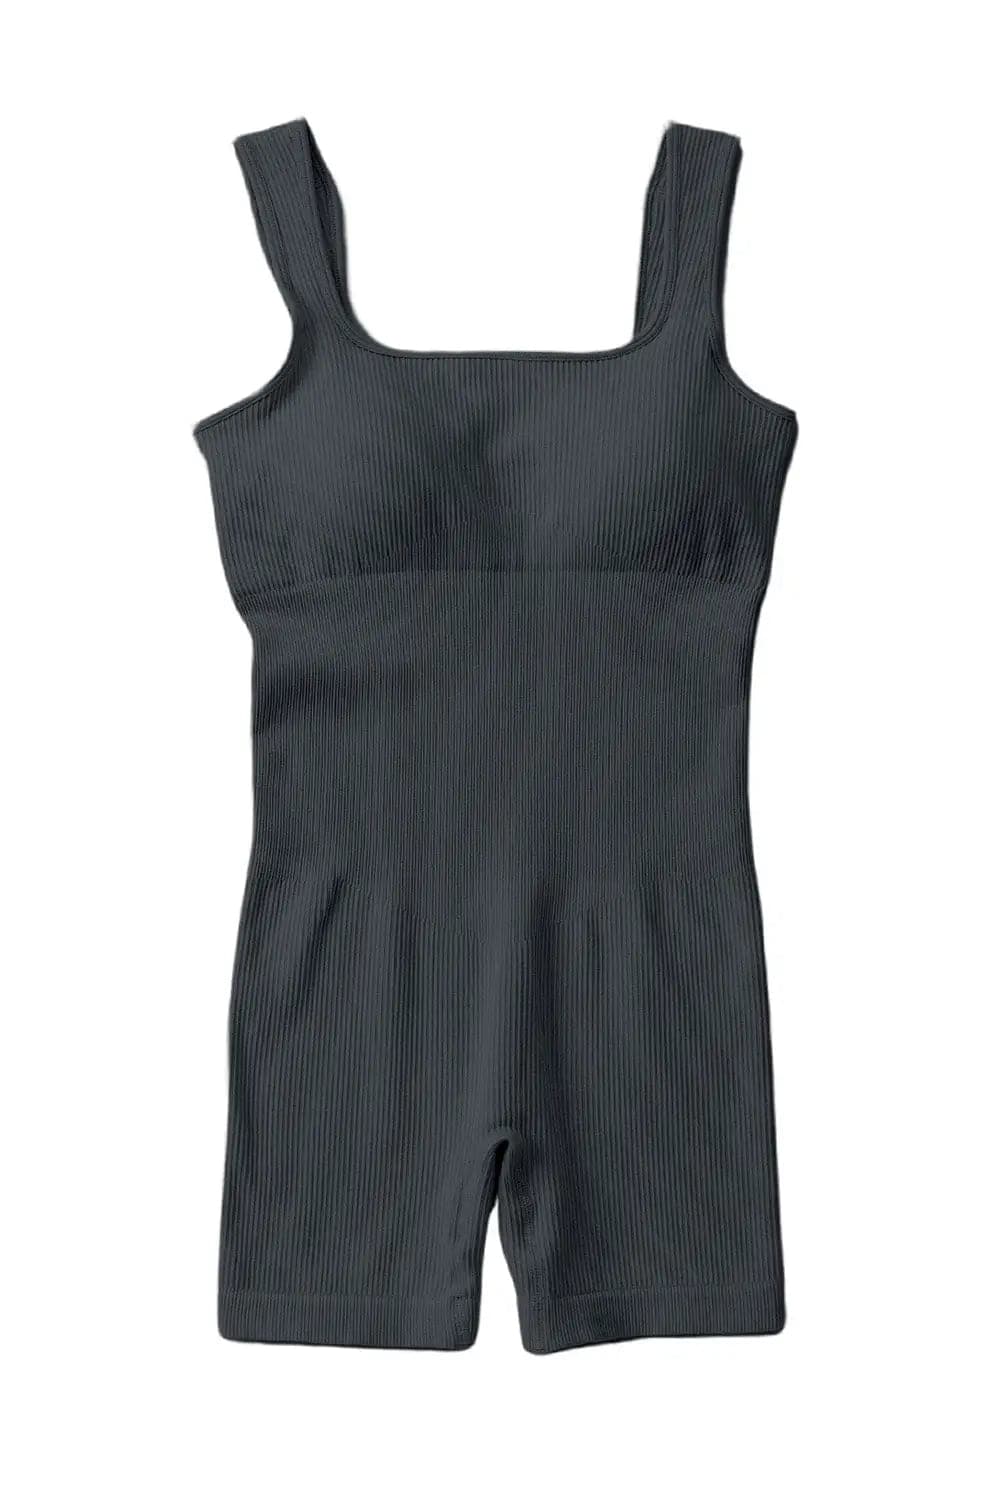 Apricot Ribbed Square Neck Padded Sports Romper - Activewear